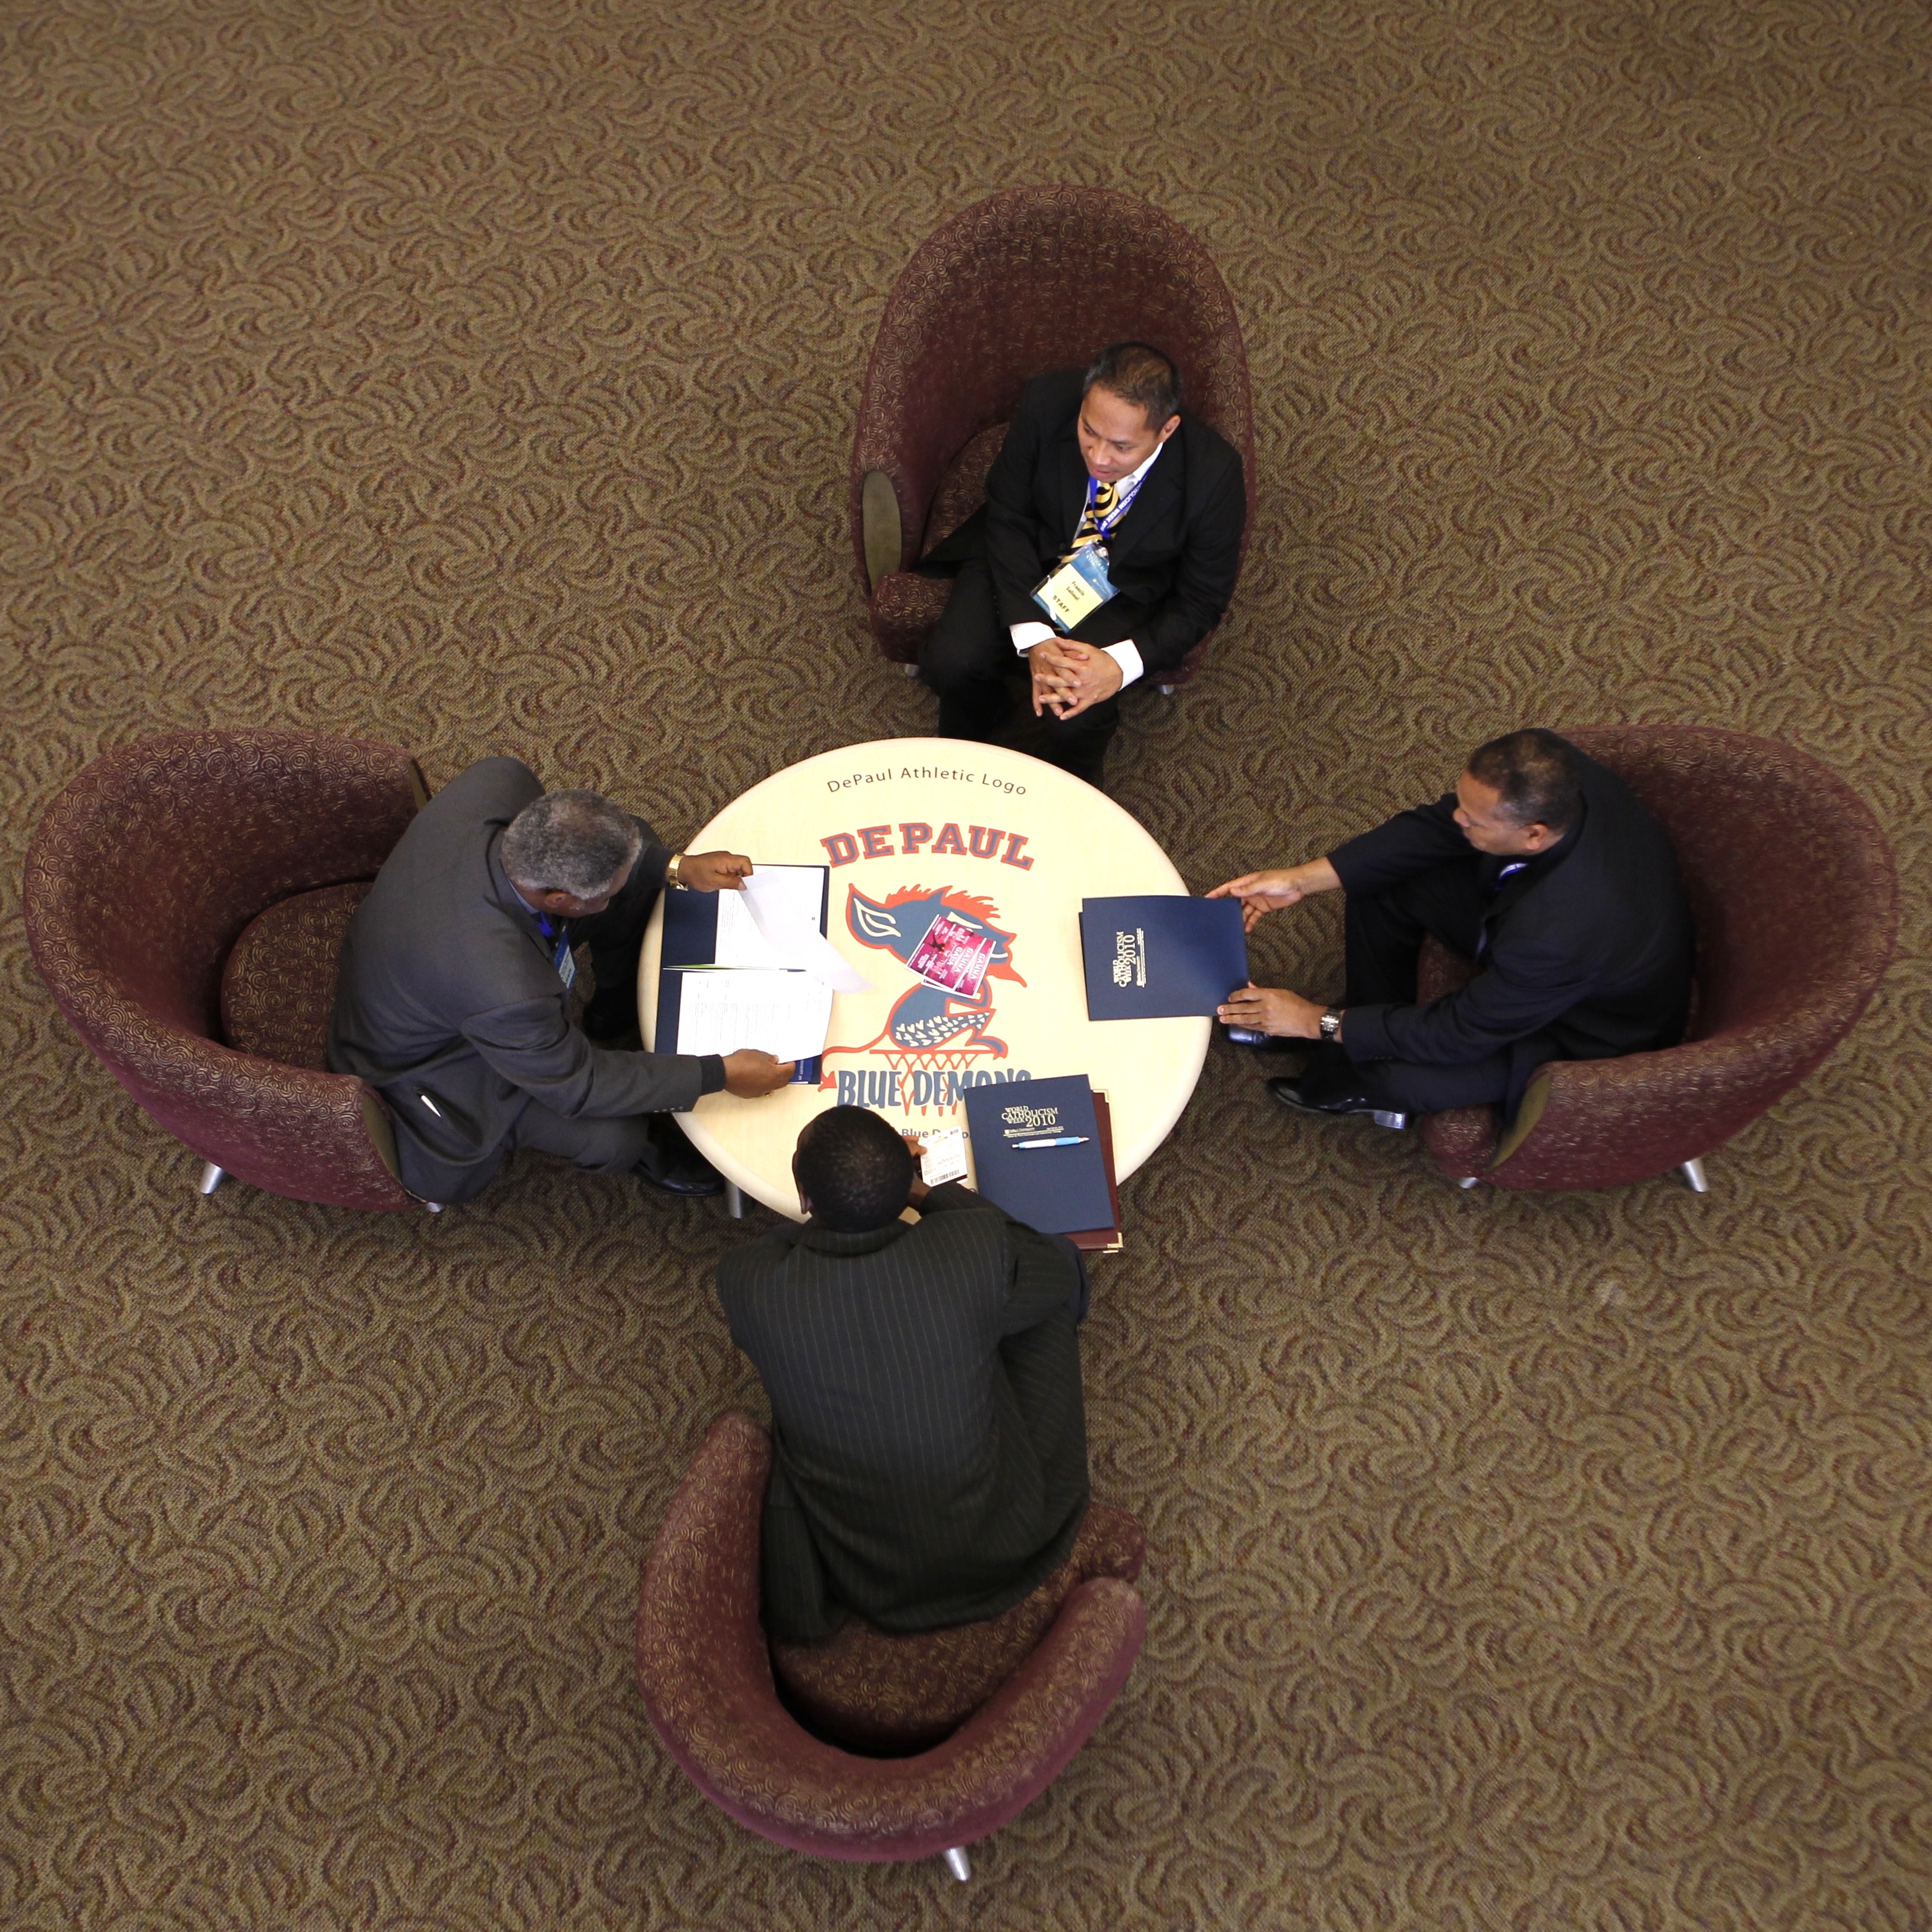 Bird's eye view of four people in conversation at a round table